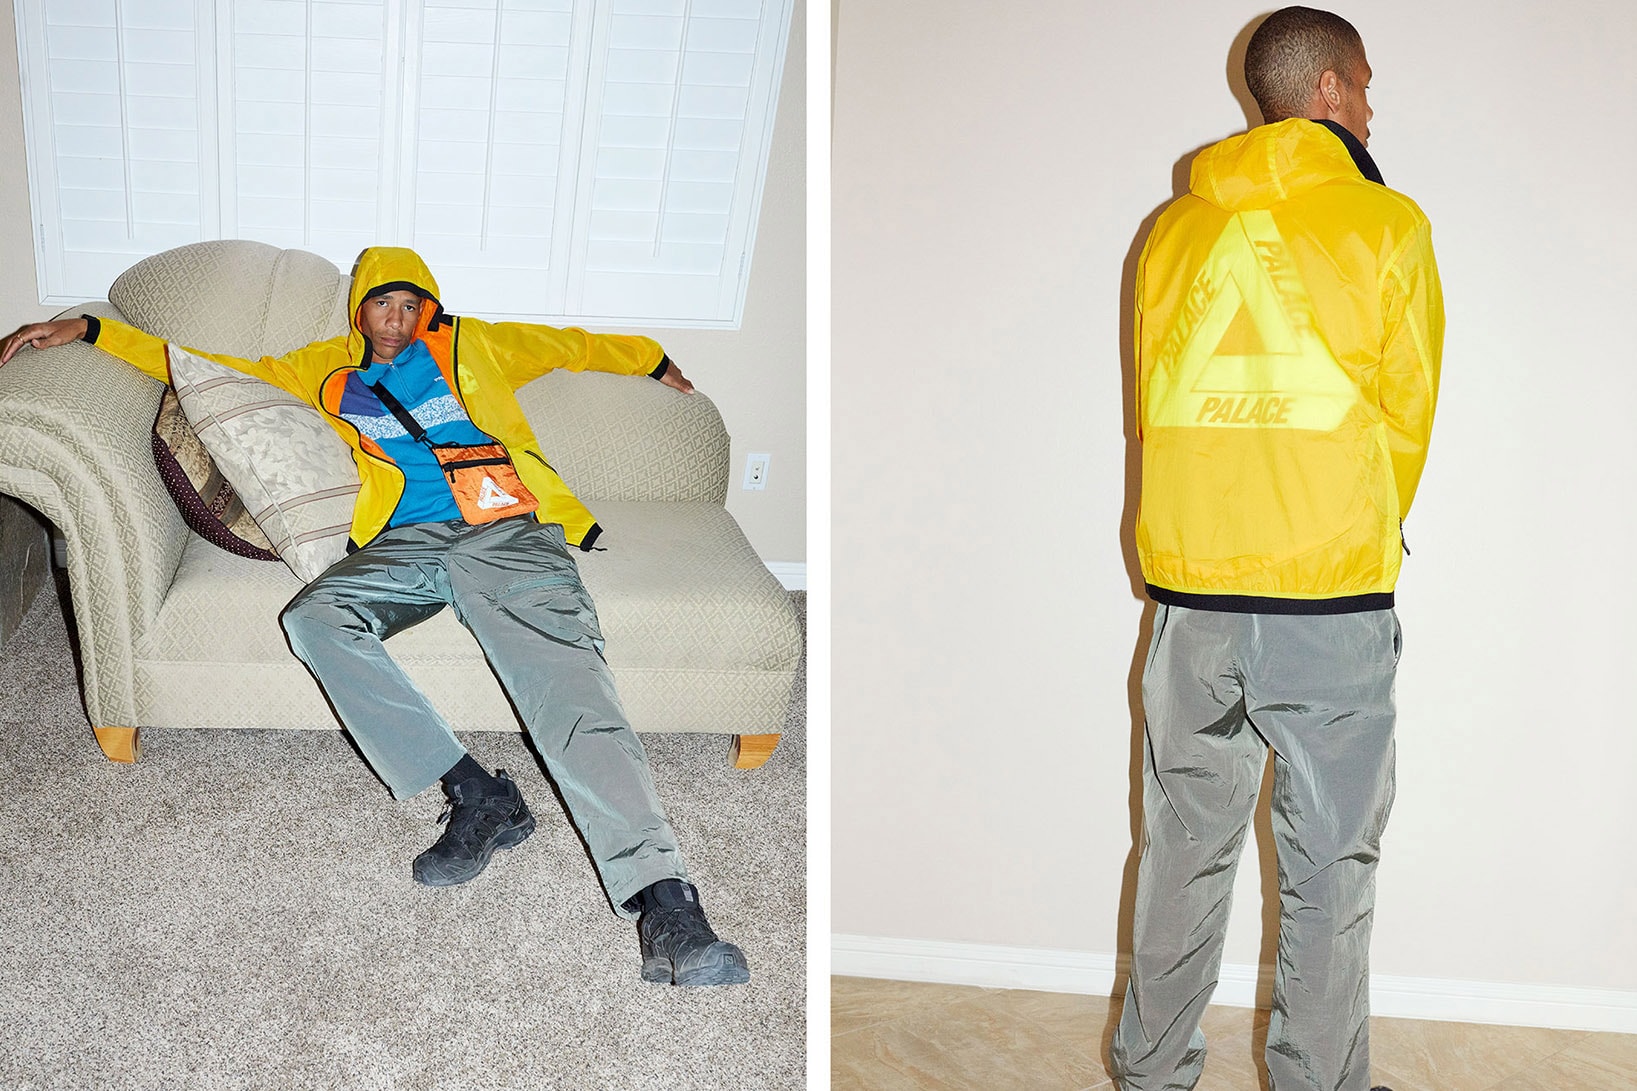 Palace Summer 2018 Lookbook Juergen Teller London New York How to Buy Cop Purchase Blondey McCoy Lucien Clarke Release Details Information First Look